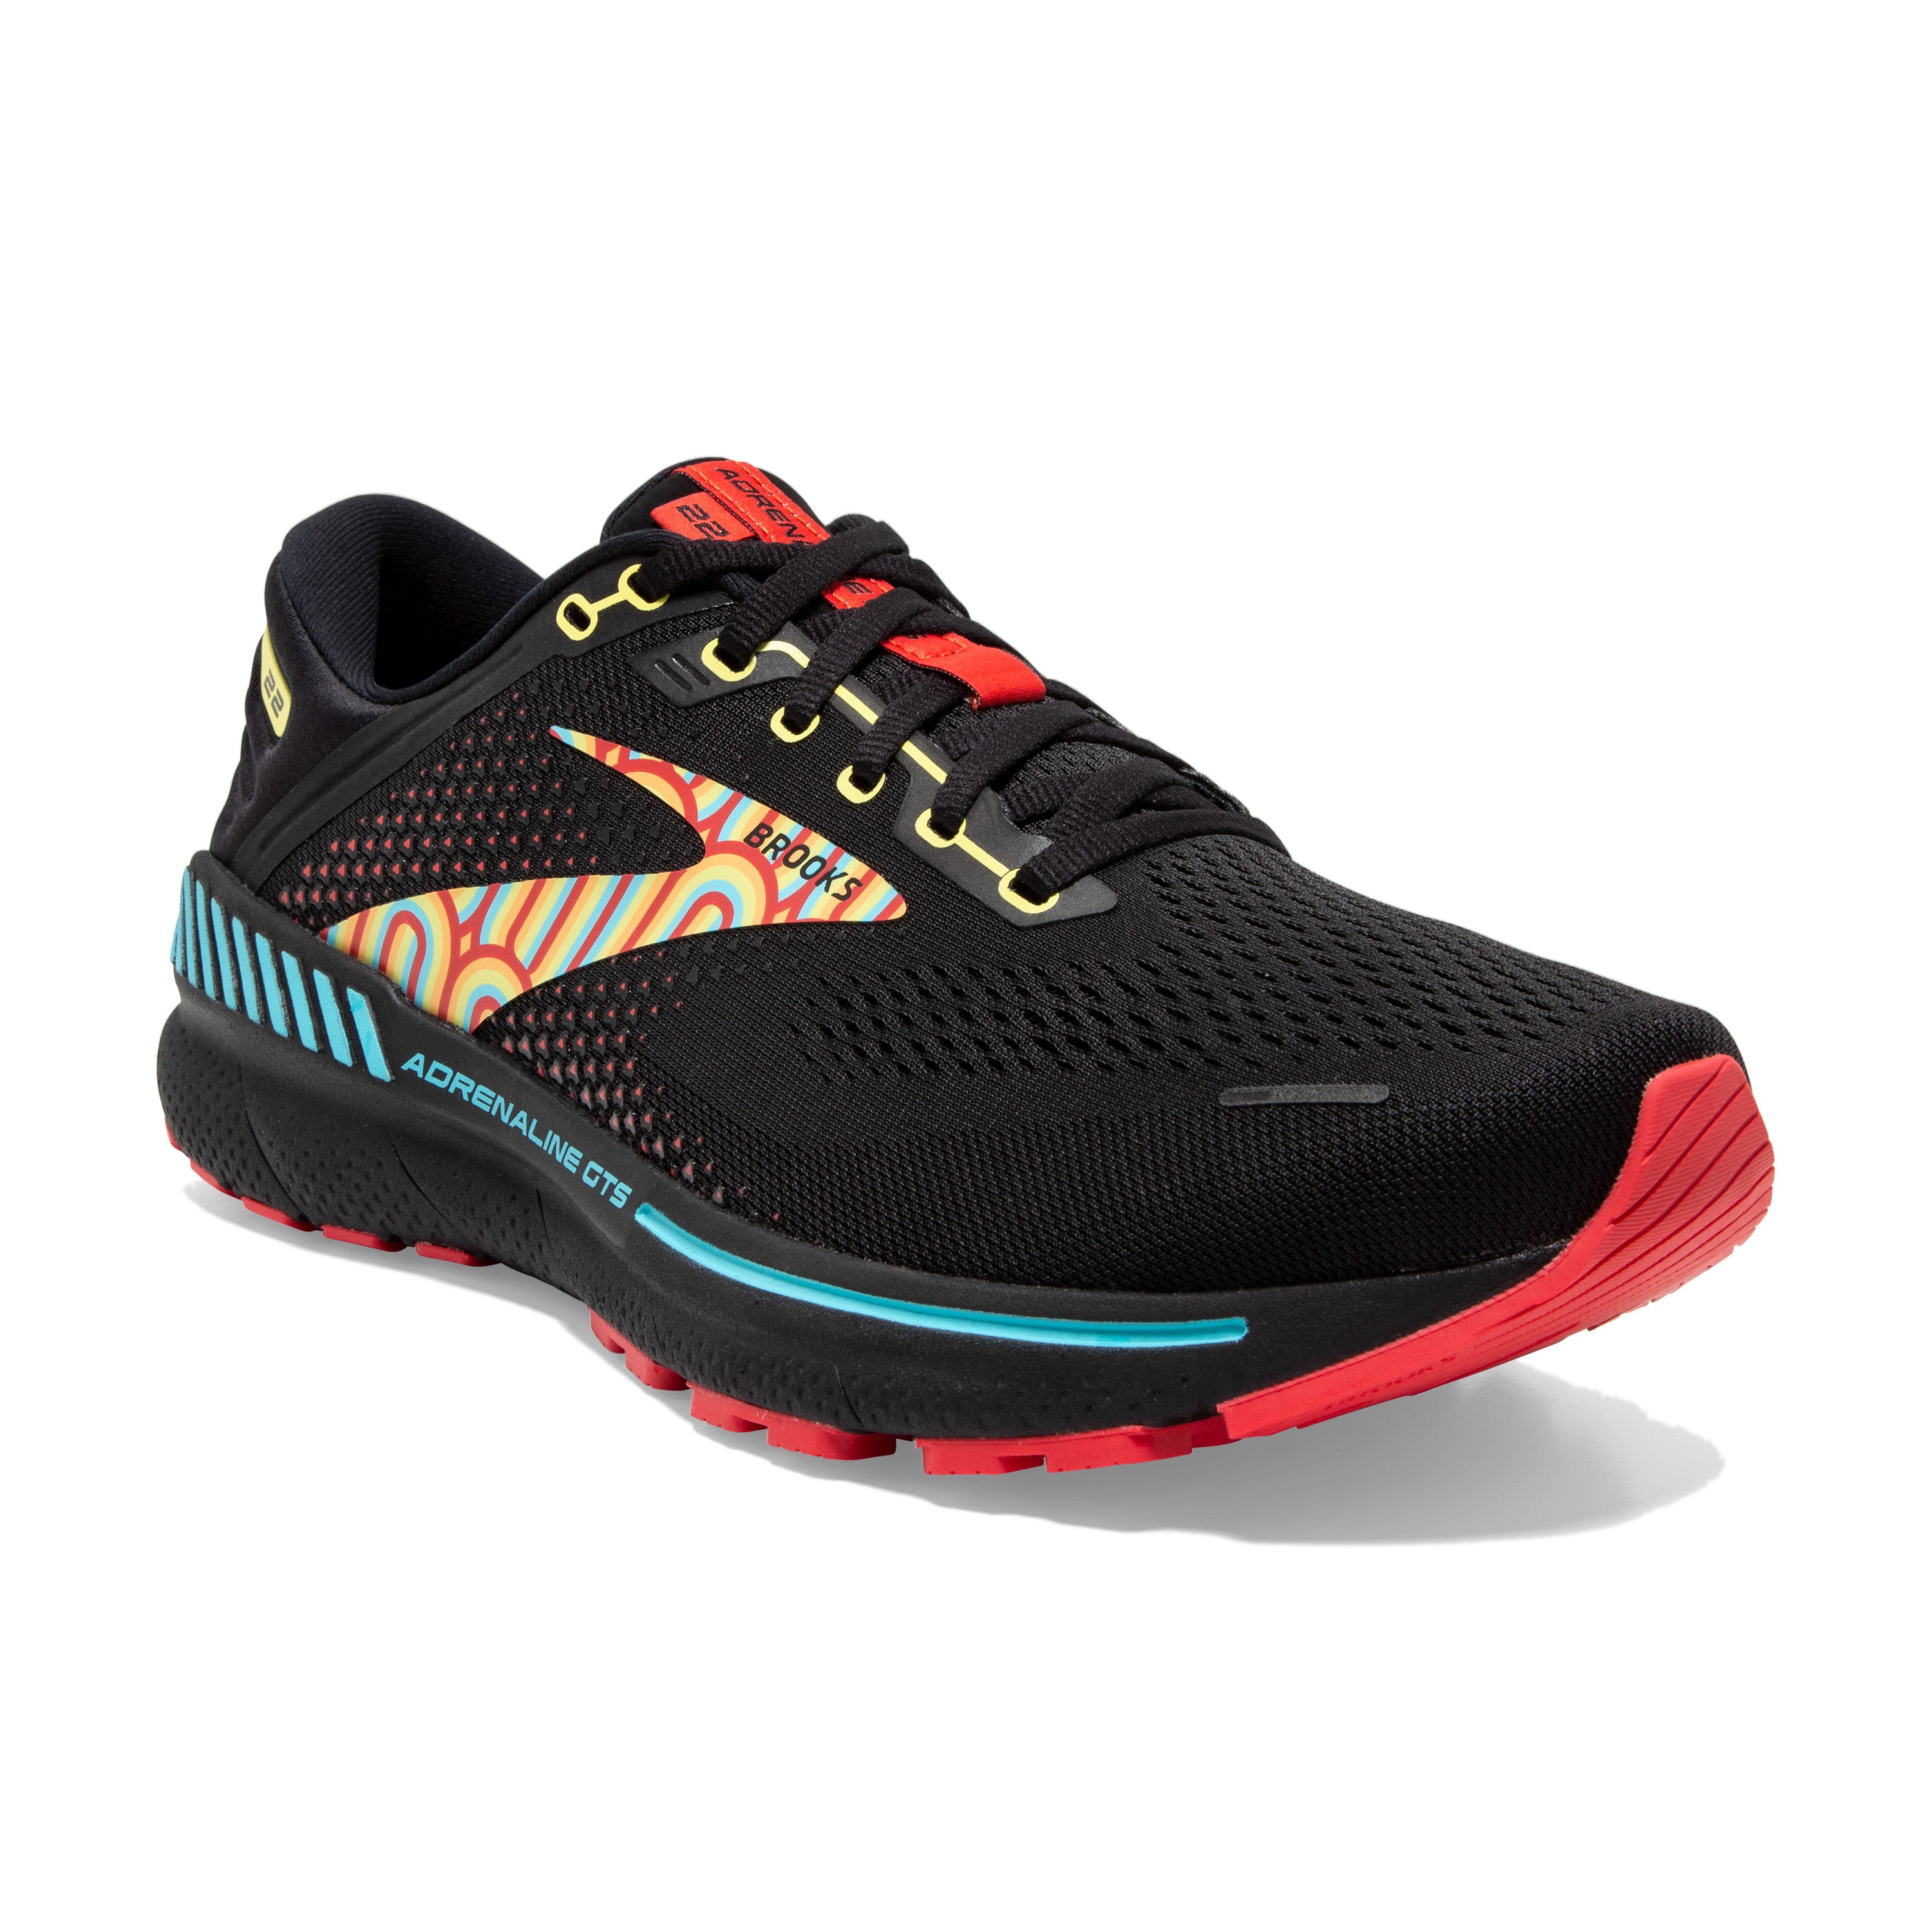 Adrenaline GTS 22 (LE) - Women's Road Running Shoes